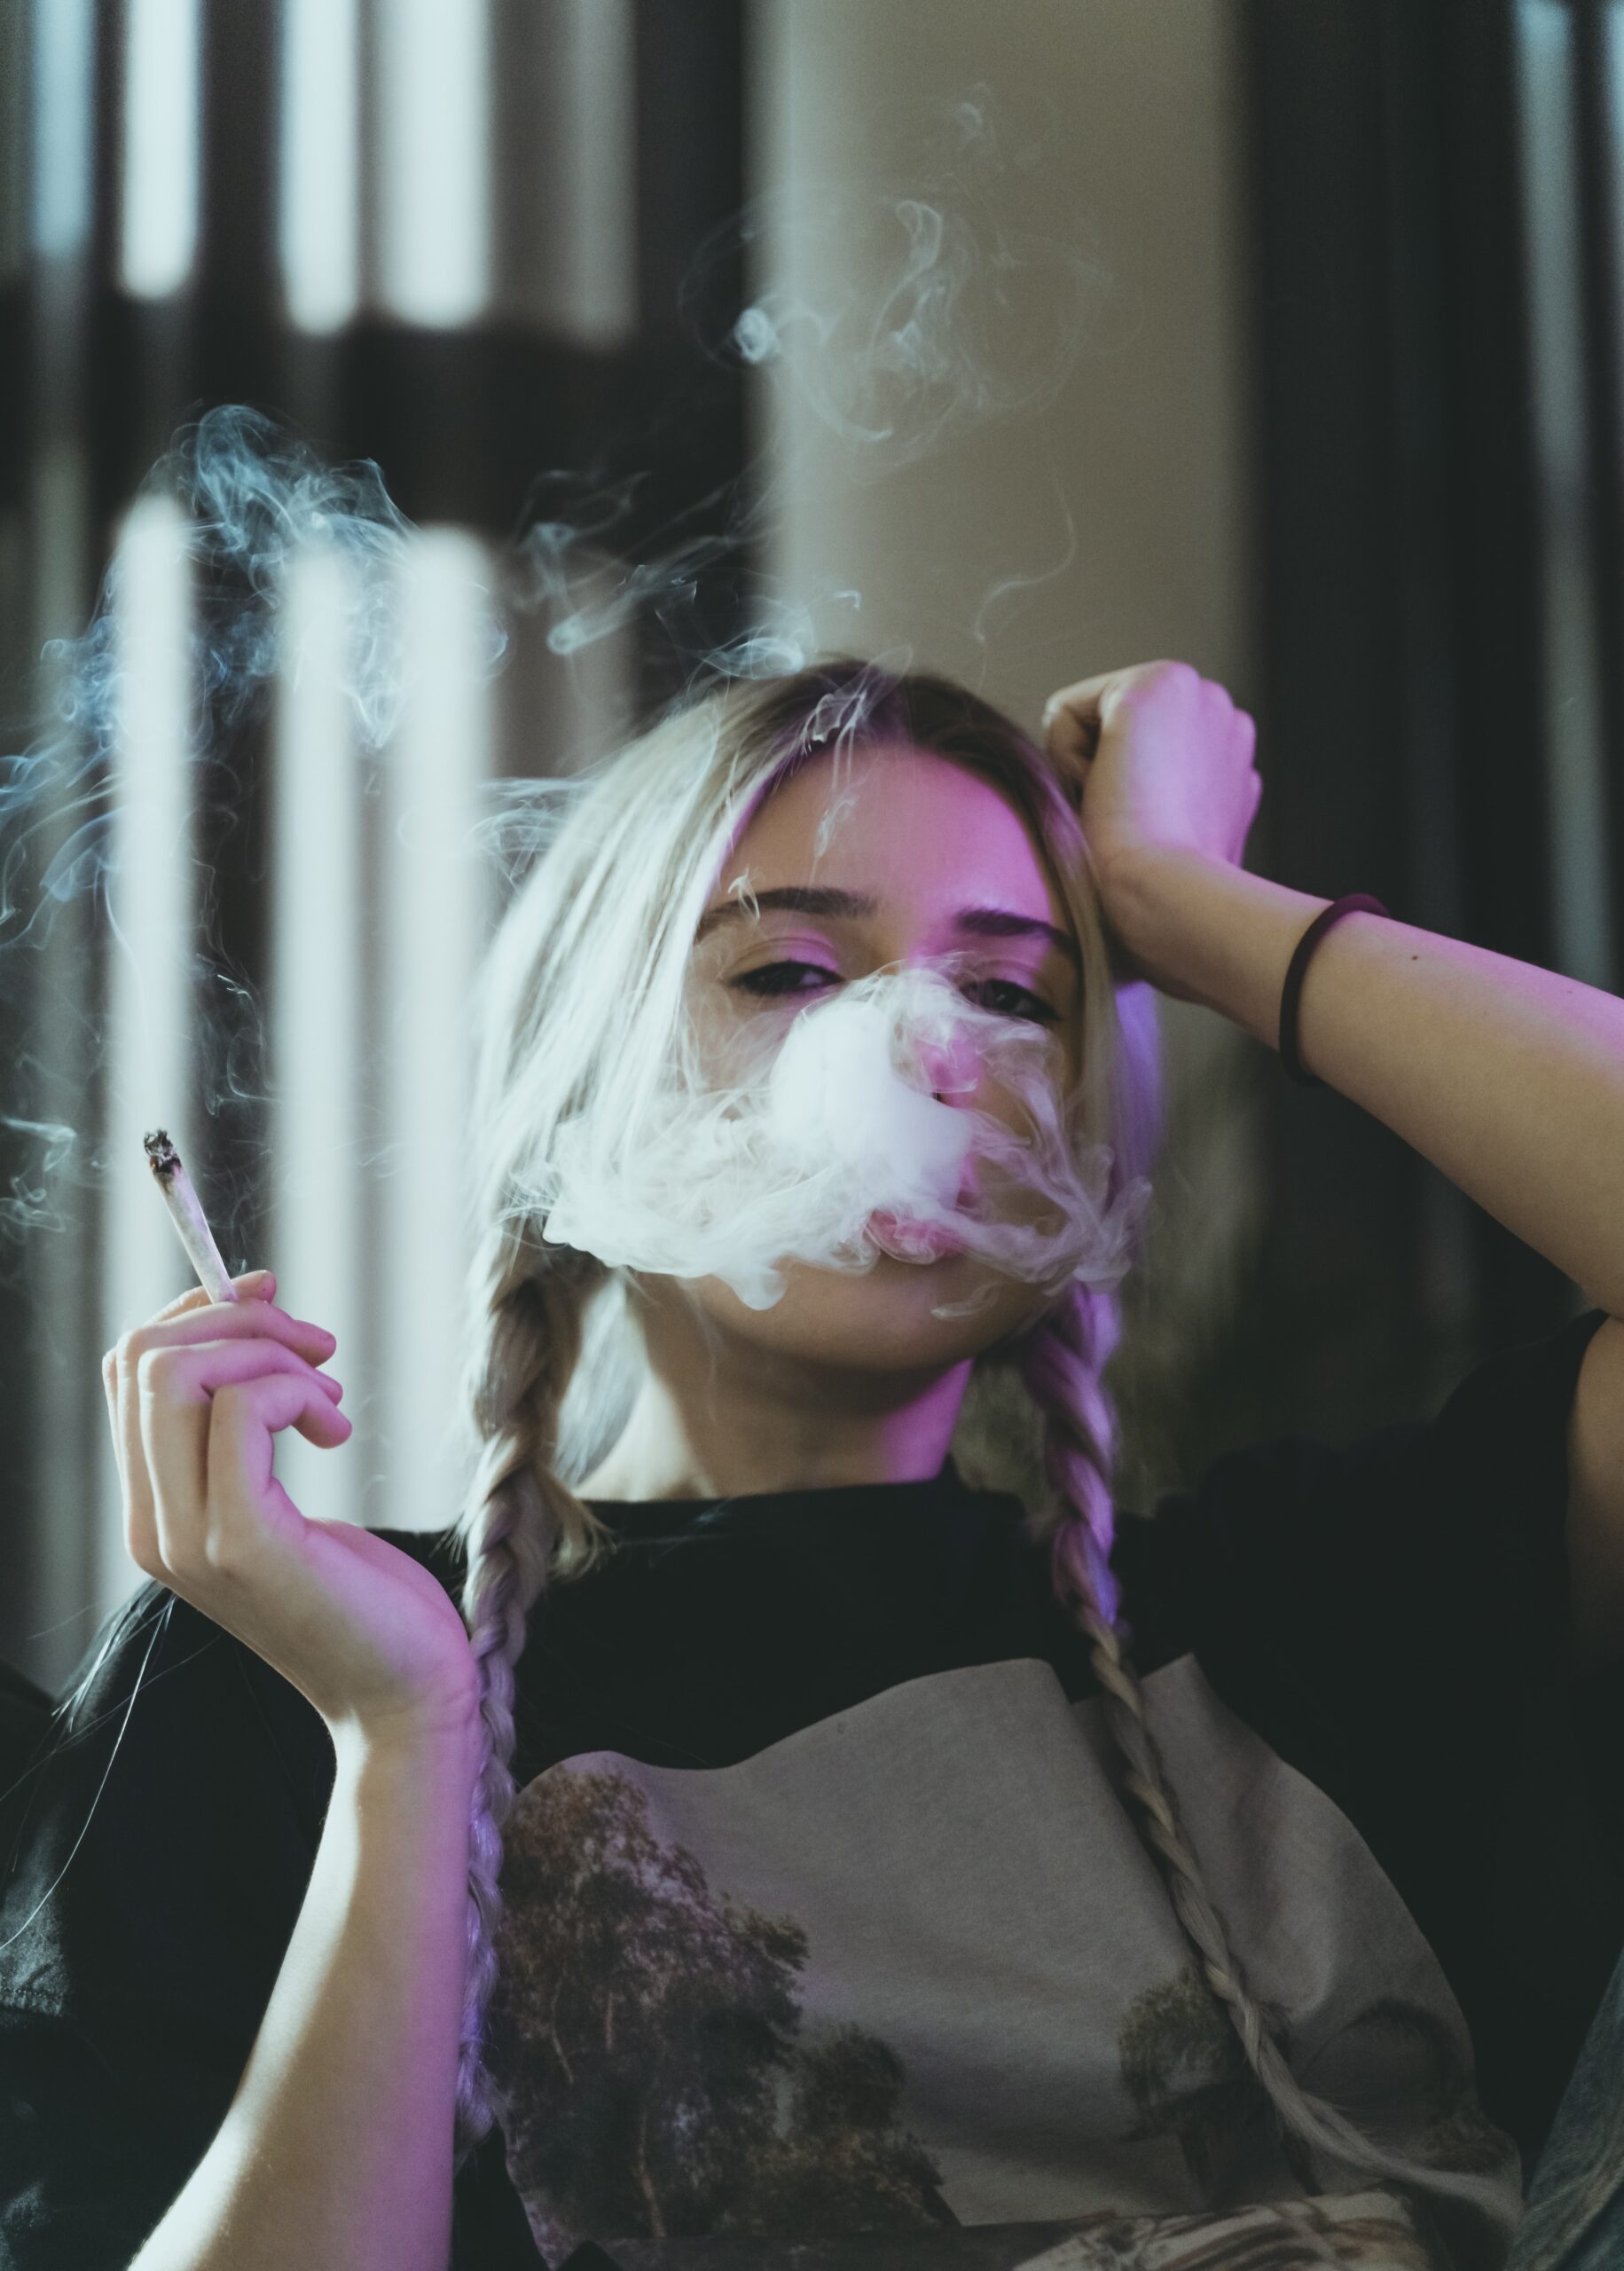 Girl holding a cigarette and smoking